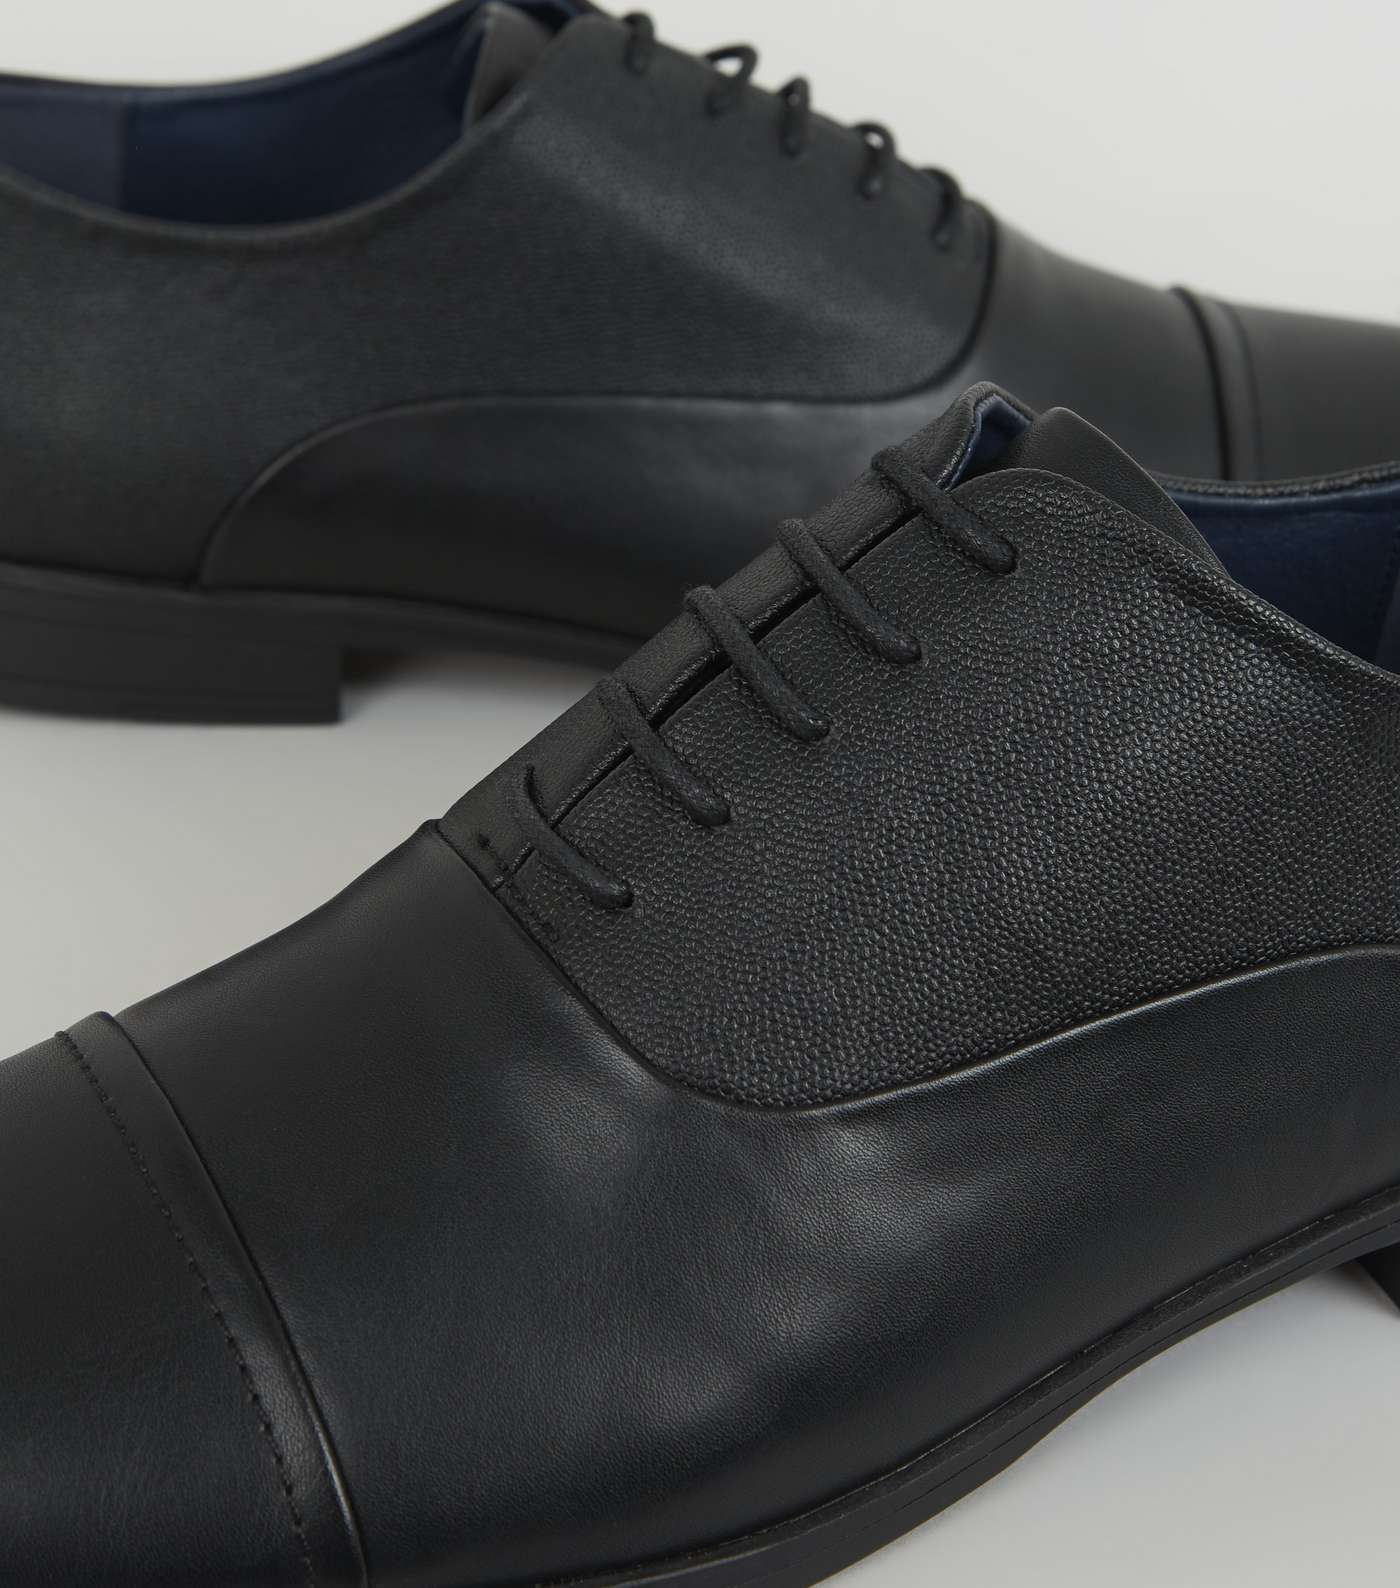 Black Leather-Look Oxford Shoes Image 3